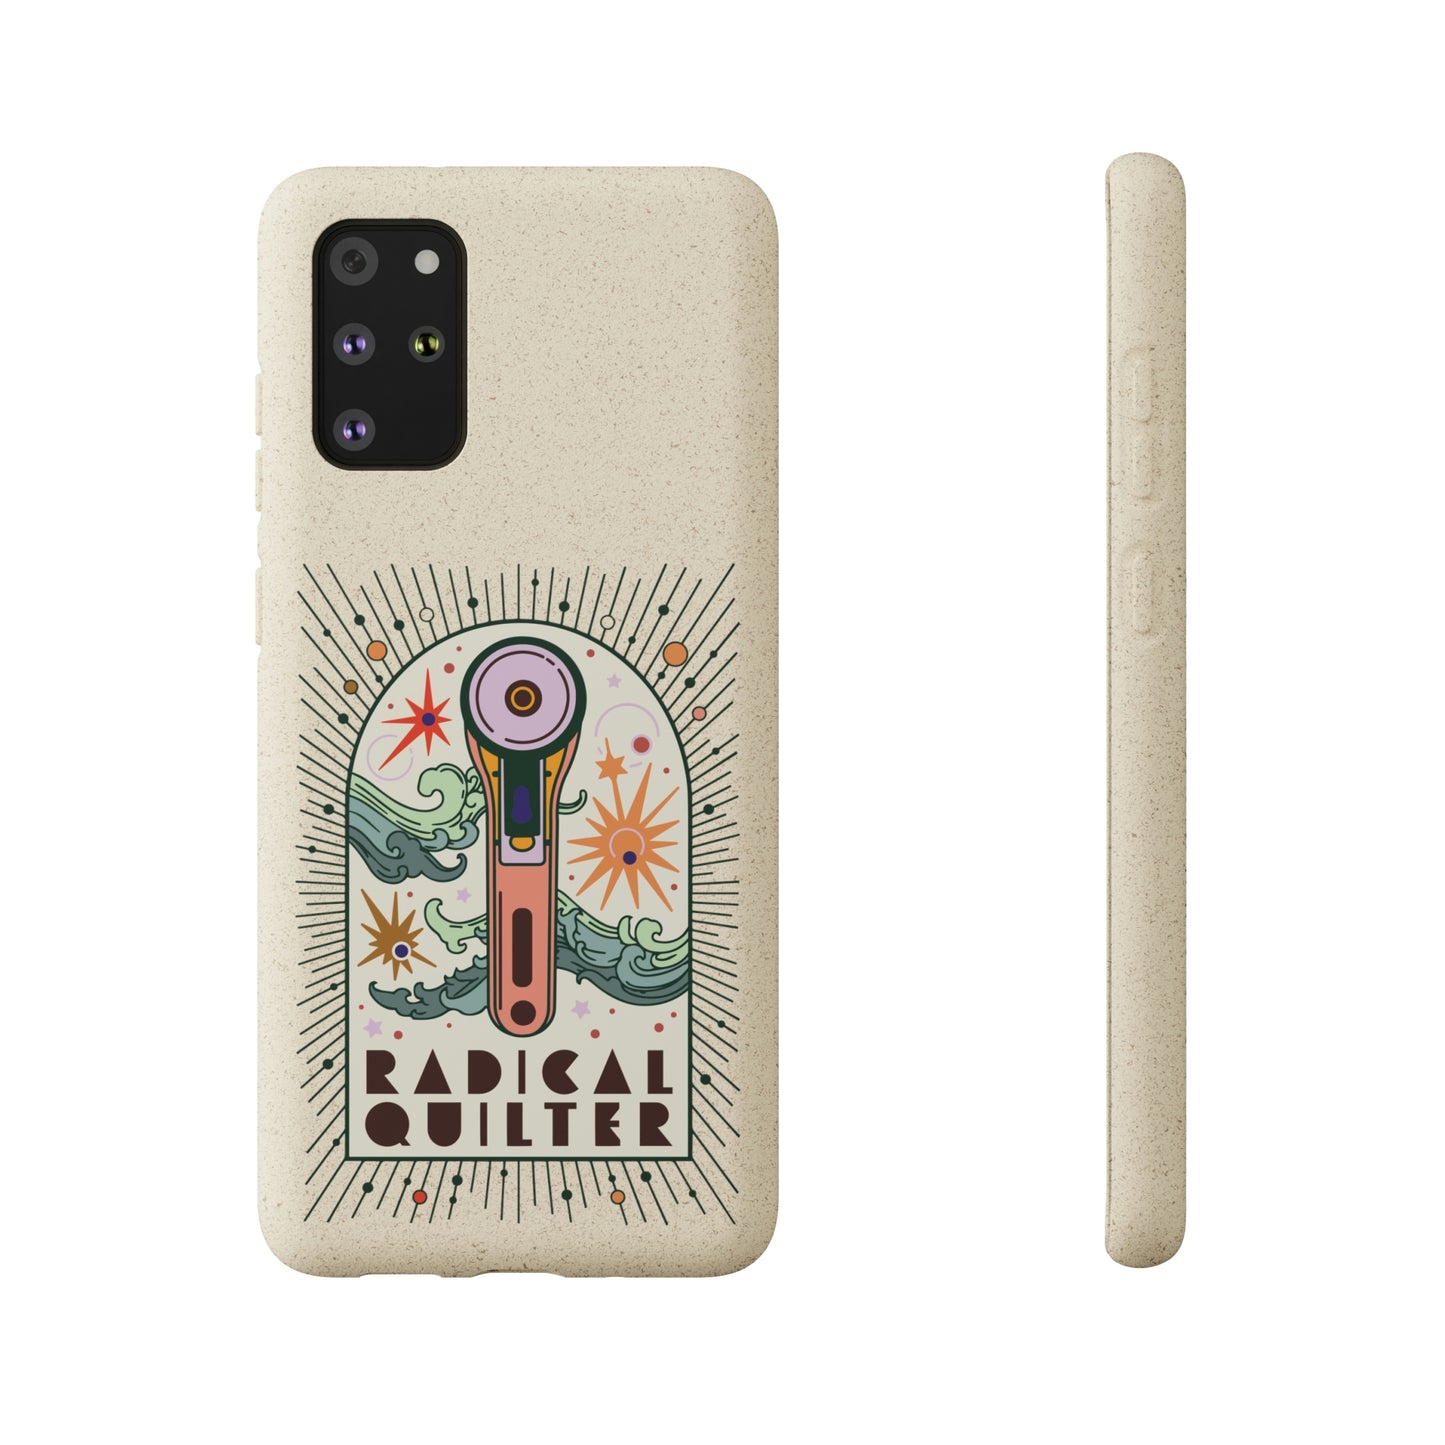 Radical Quilter Biodegradable Phone Case